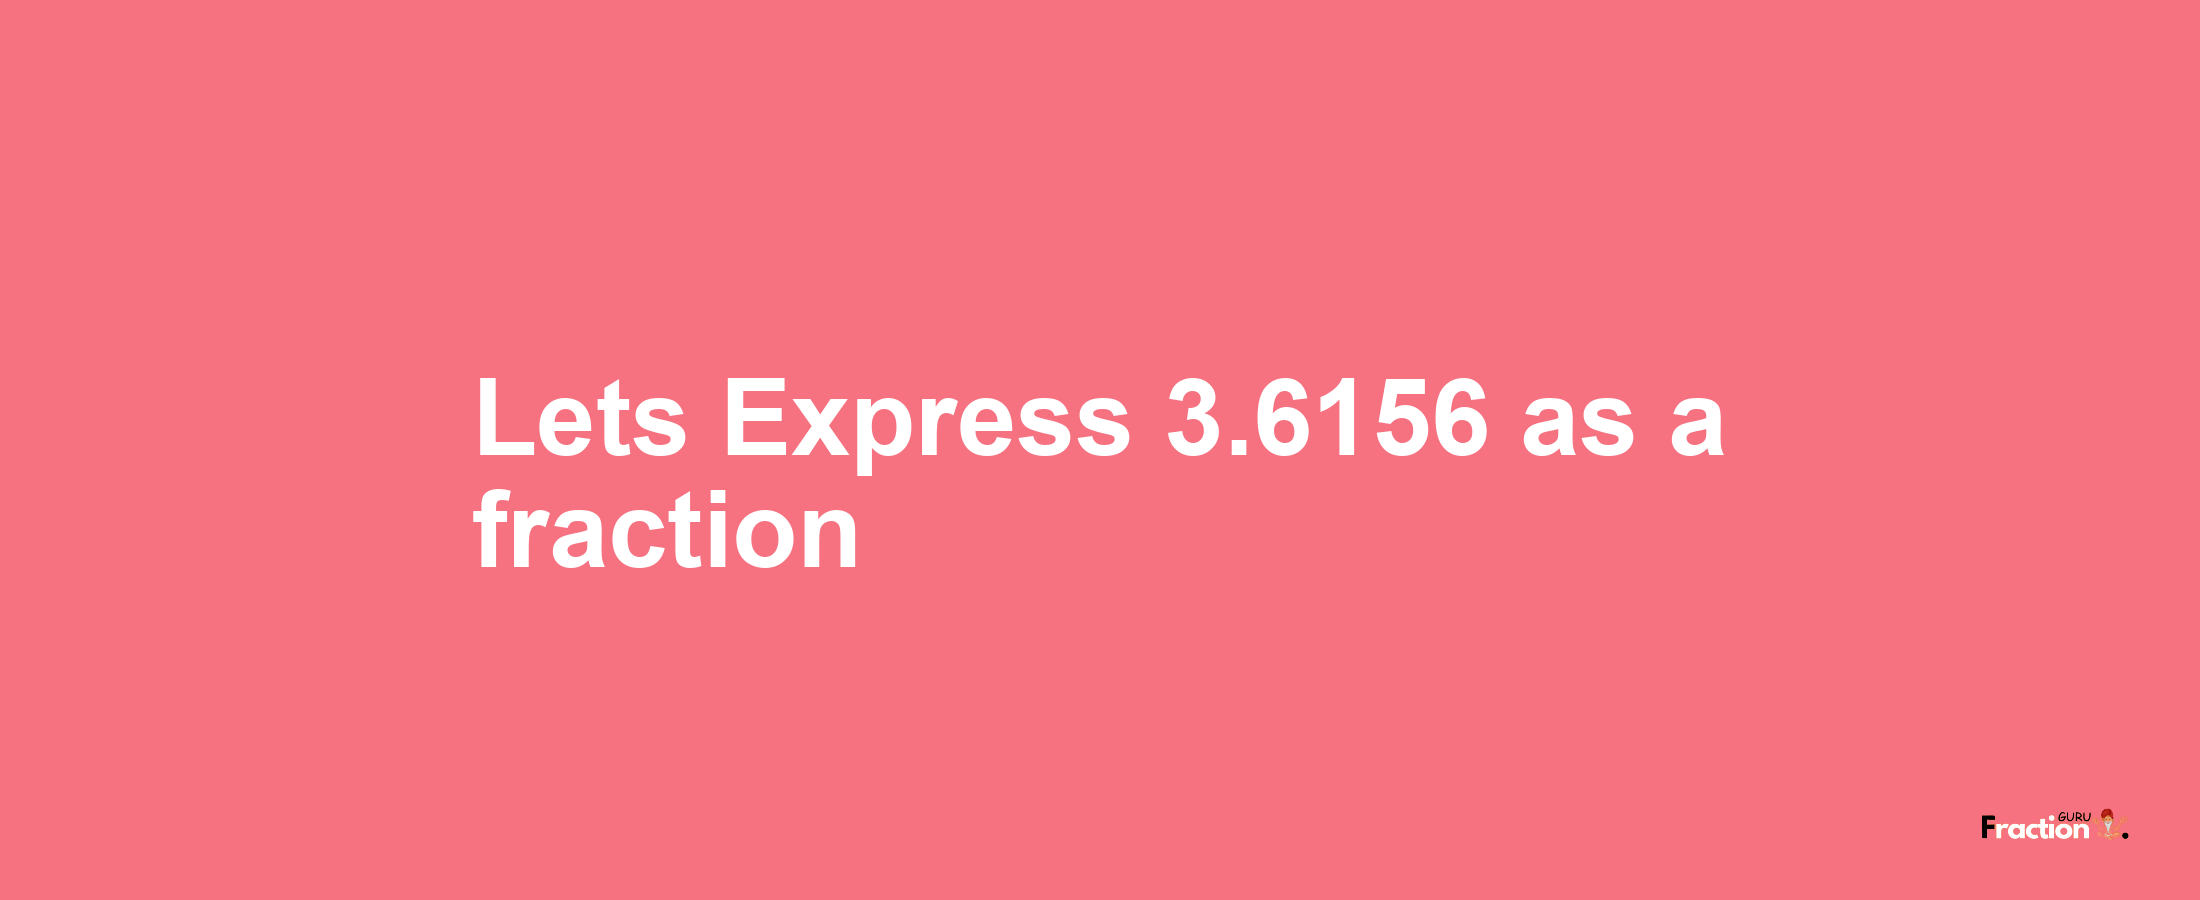 Lets Express 3.6156 as afraction